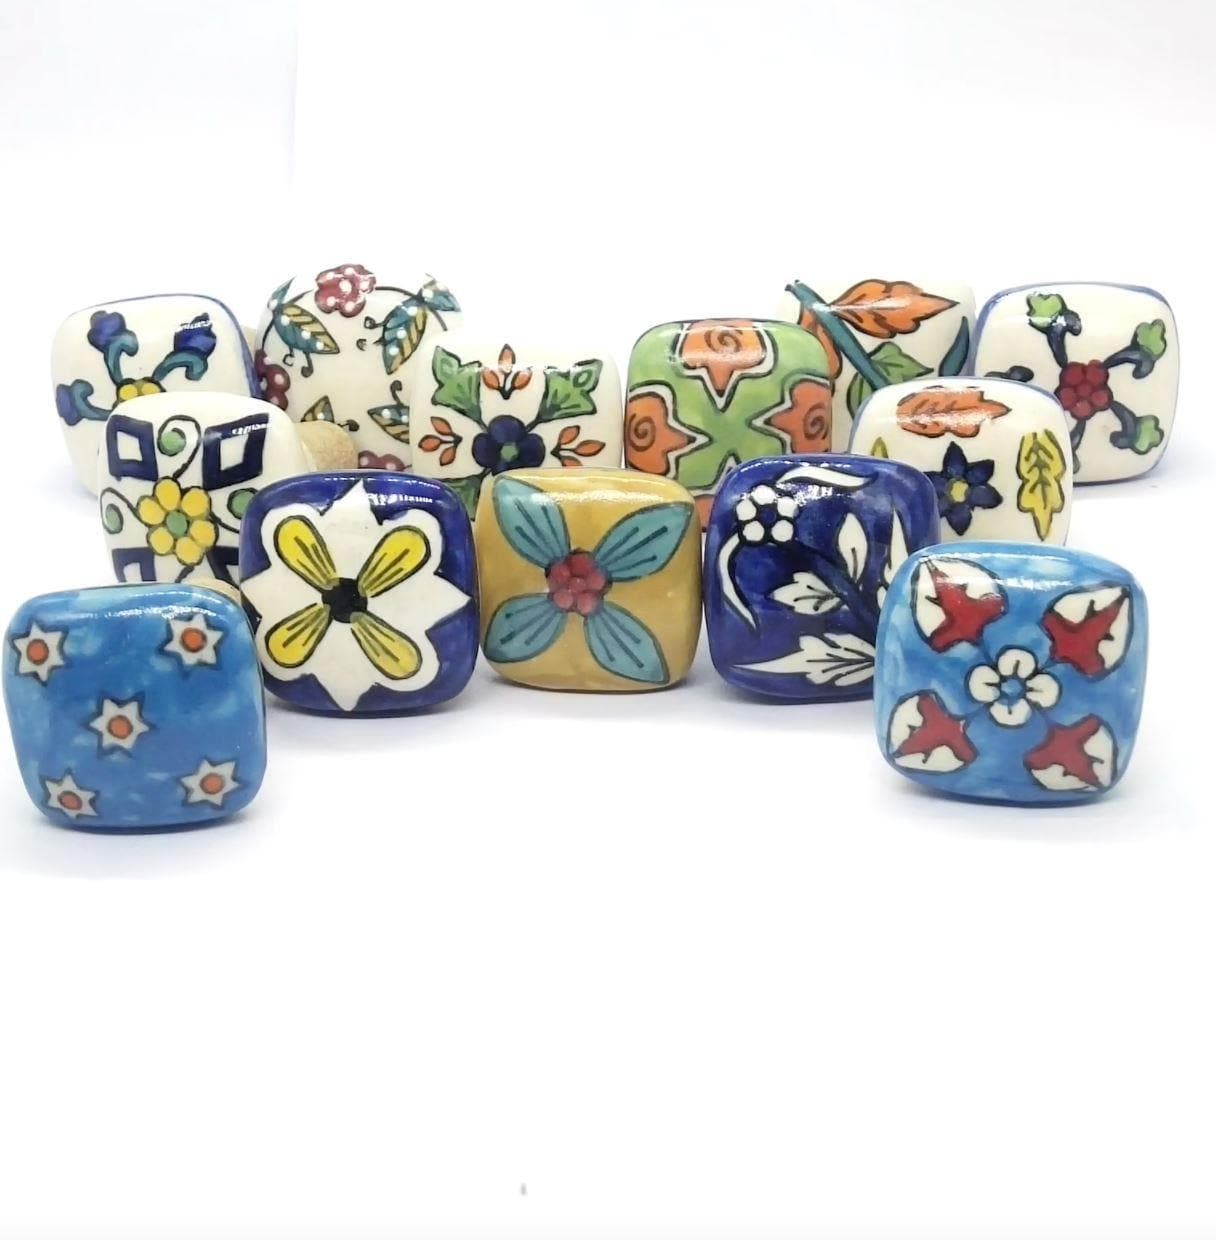 Assorted Square Ceramic Hand Painted Wine Bottle Stoppers - MAIA HOMES